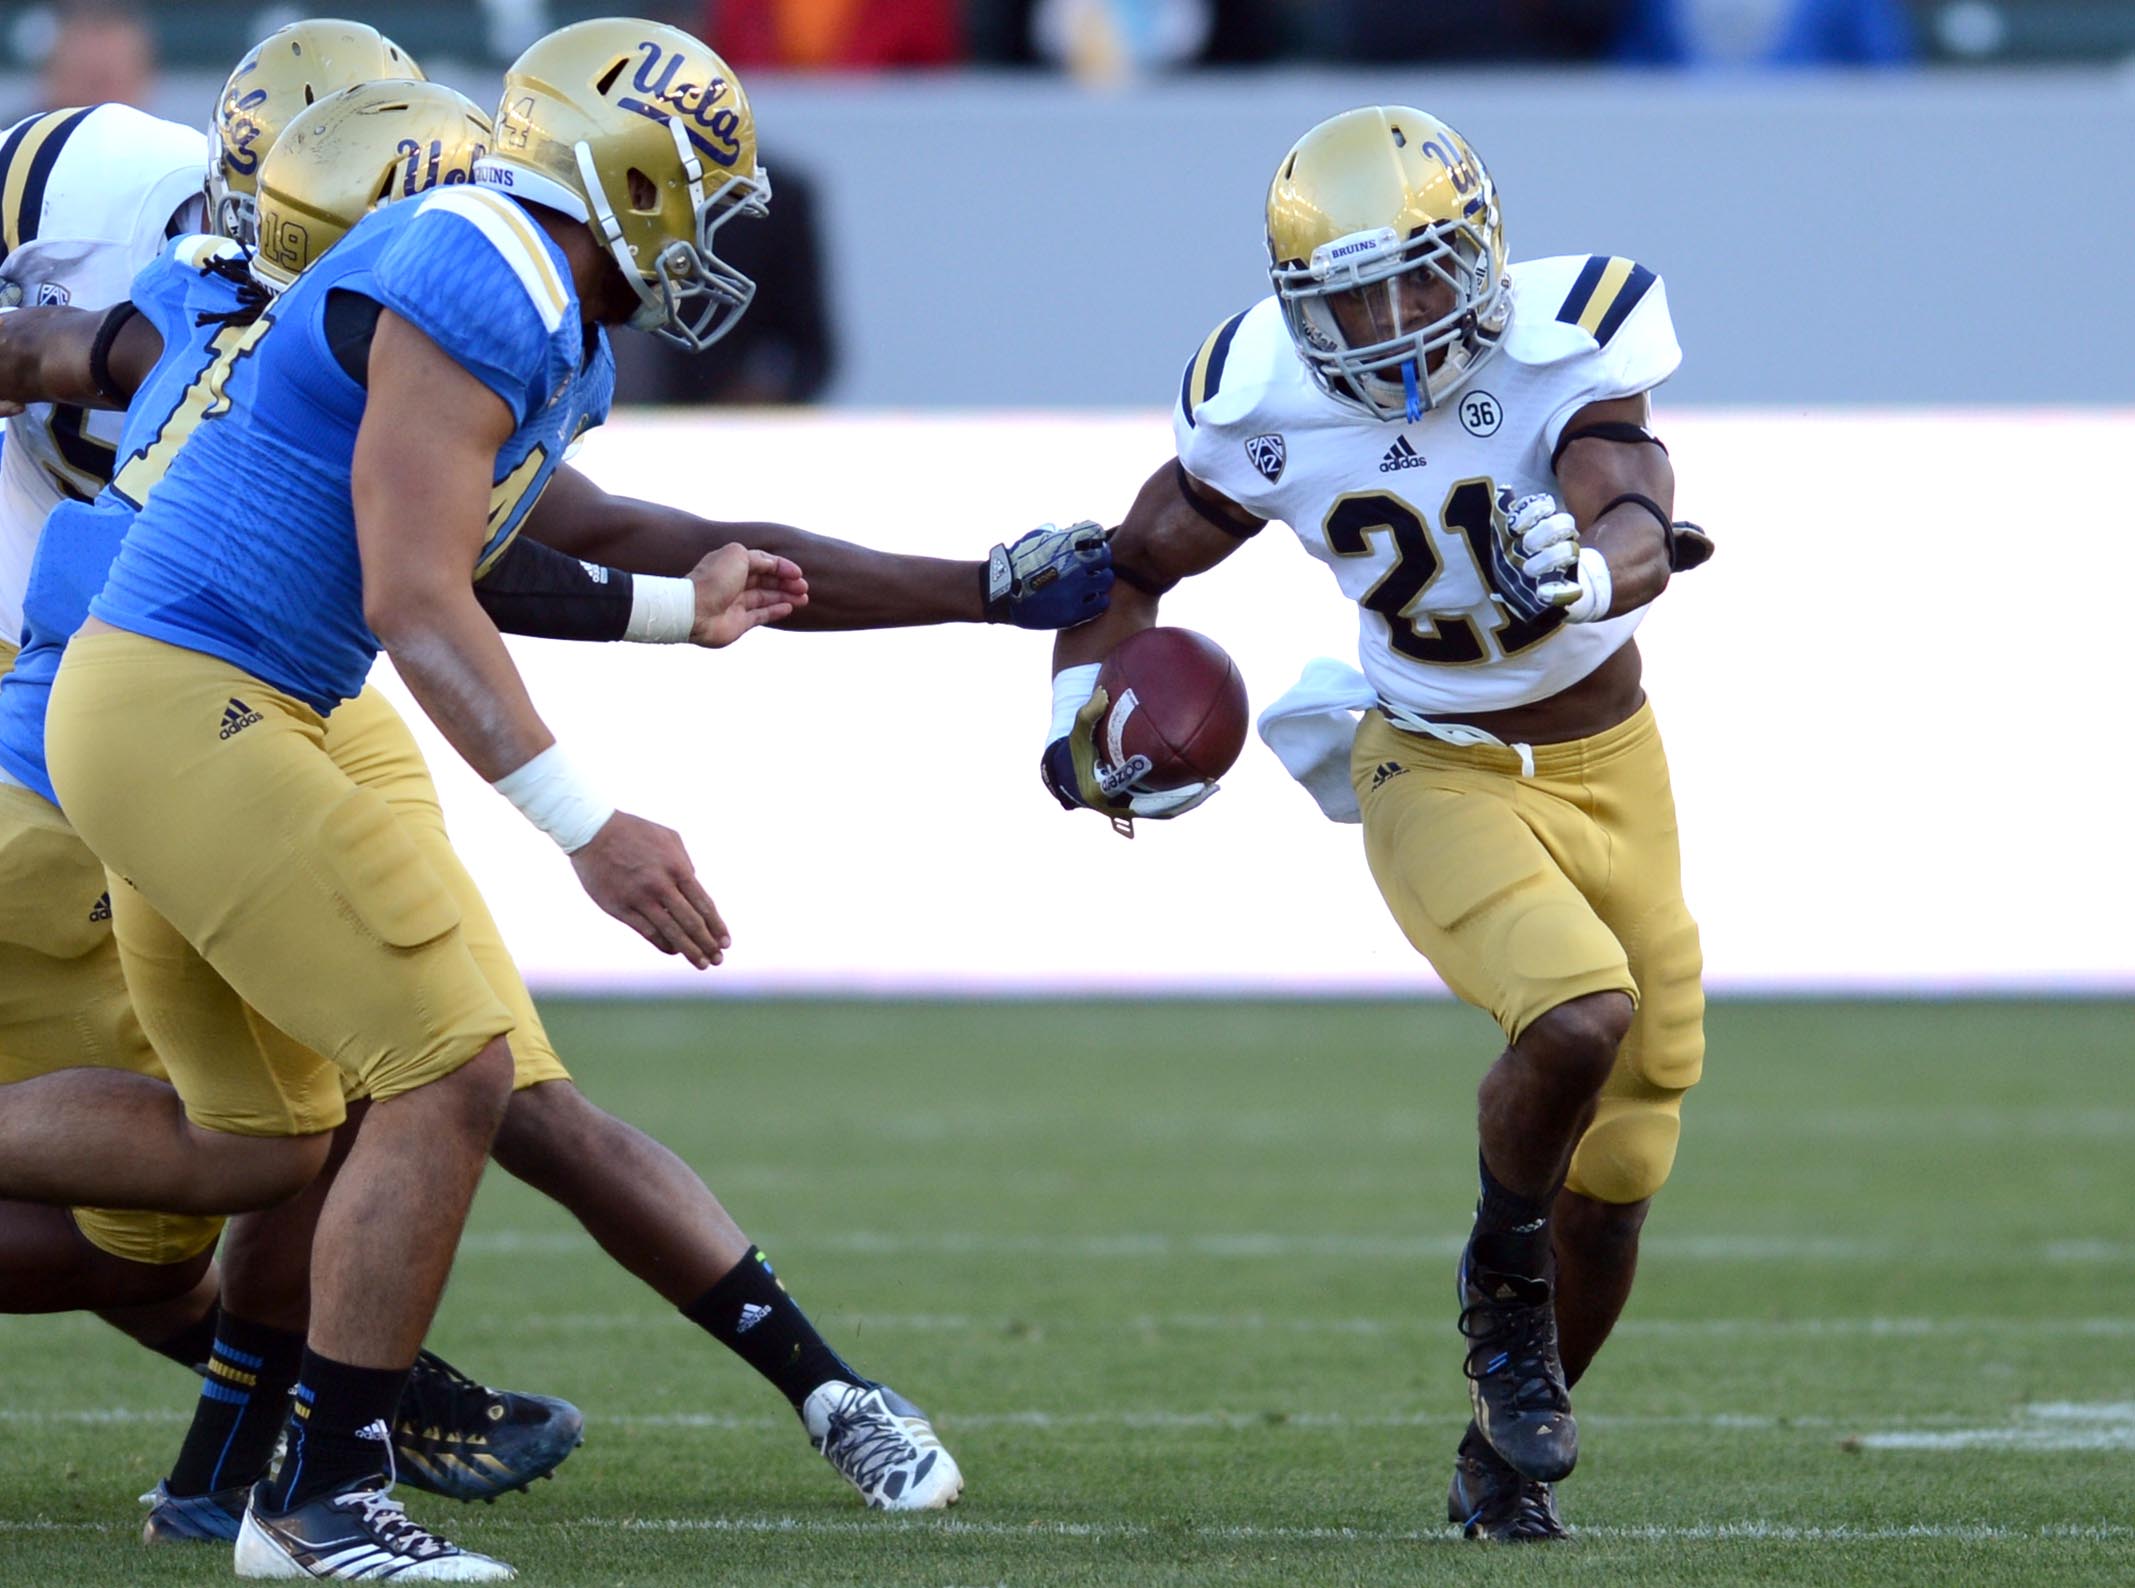 UCLA's Lee Craig,21, runs for yards against teammates, during the second quarter of the UCLA Spring Football Showcase,  at the StubHub Center.    Carson Calif., Saturday, April 26,  2014.  (Photo by Stephen Carr / Daily Breeze)